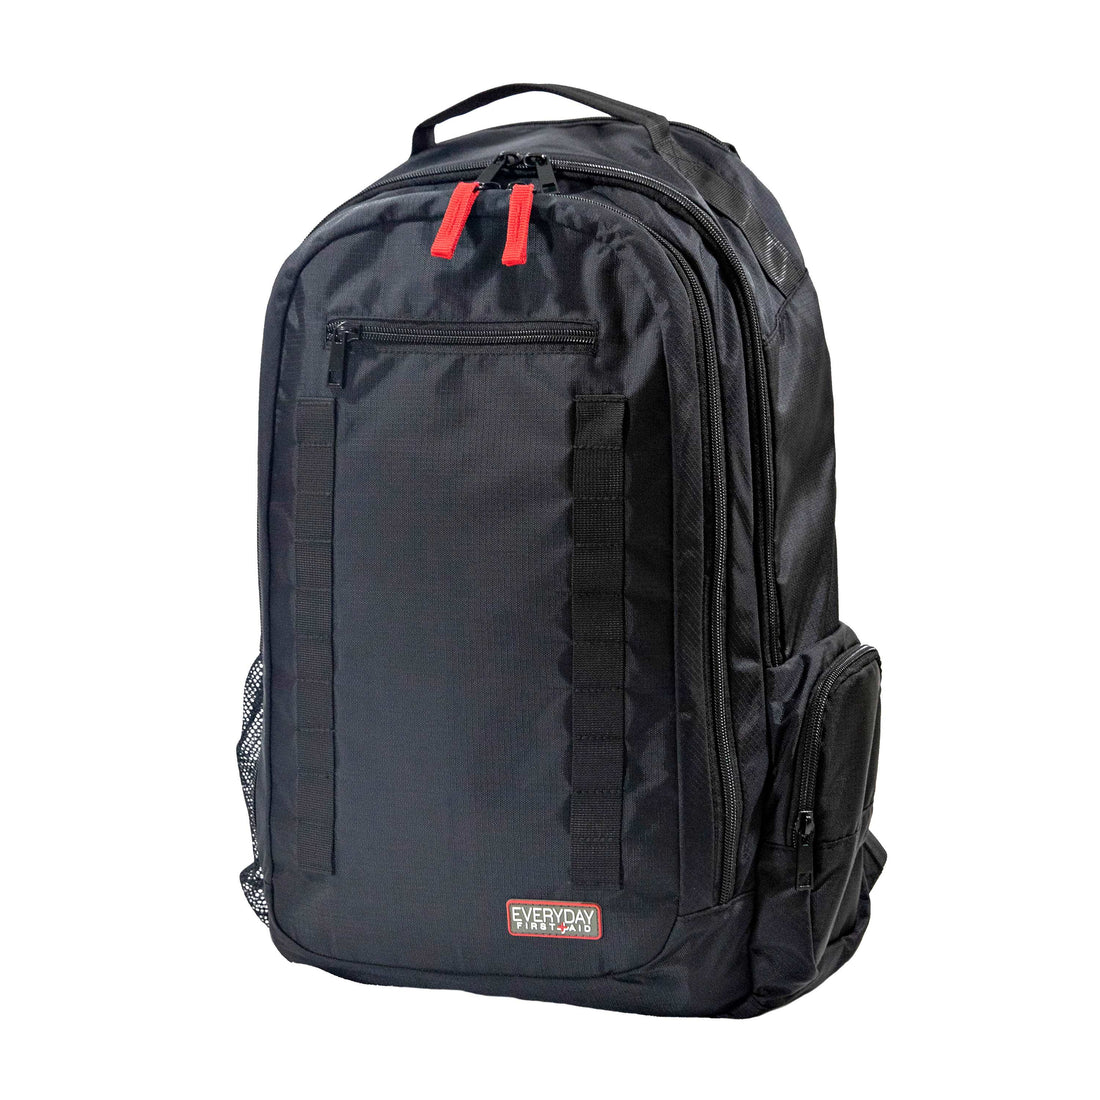 Advanced first aid kit backpack left side